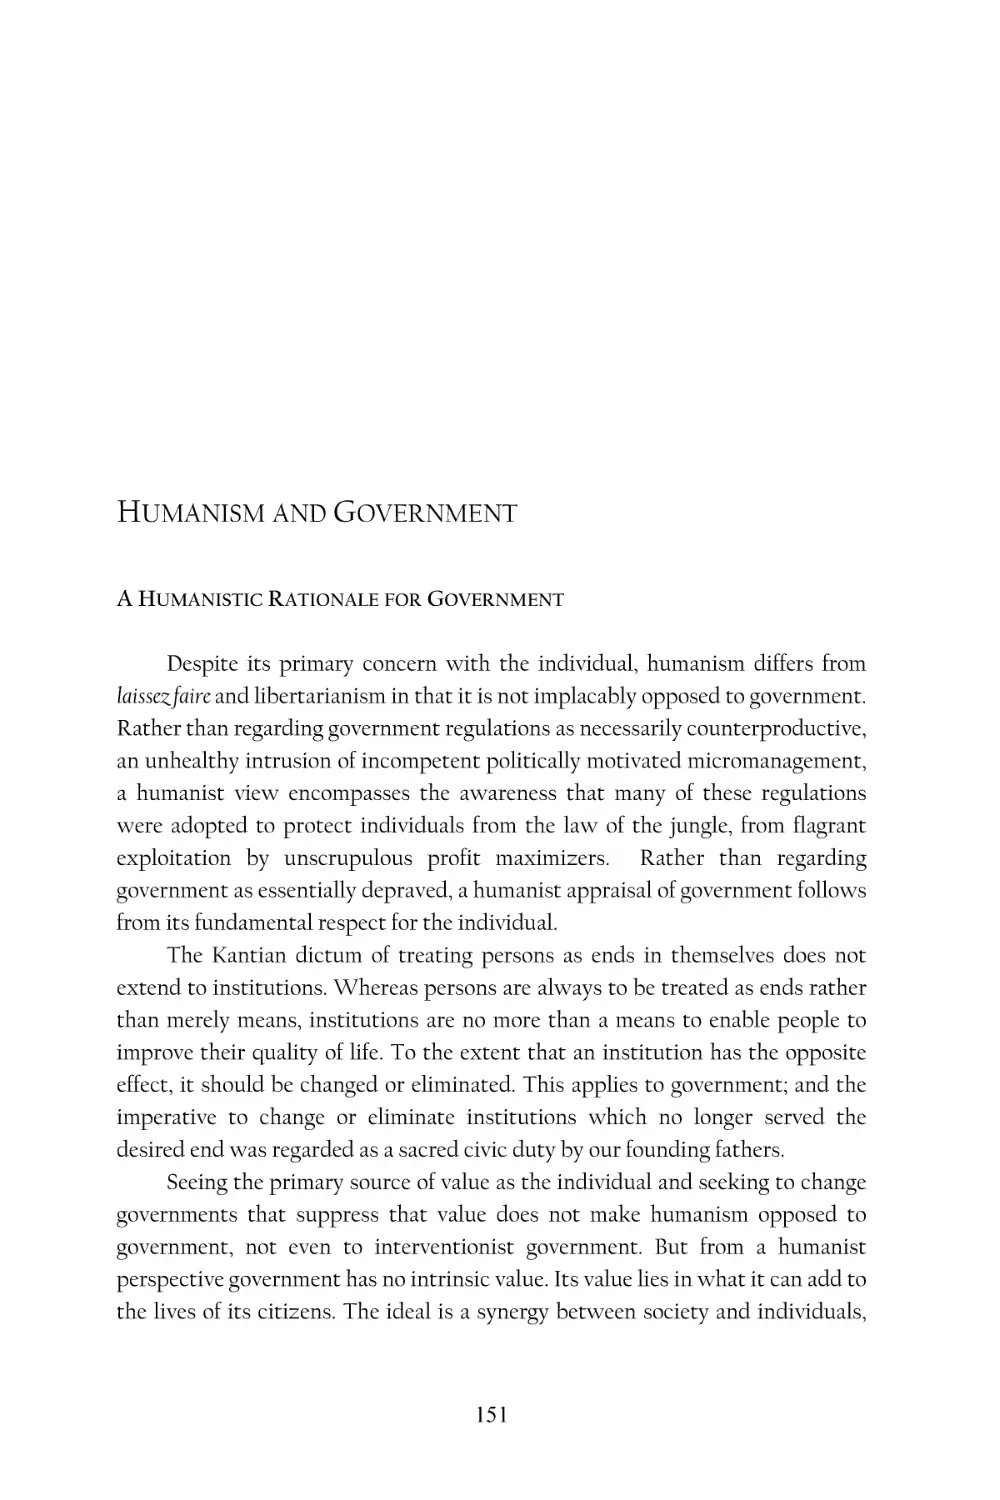 Humanism and Government
A Humanistic Rationale for Government